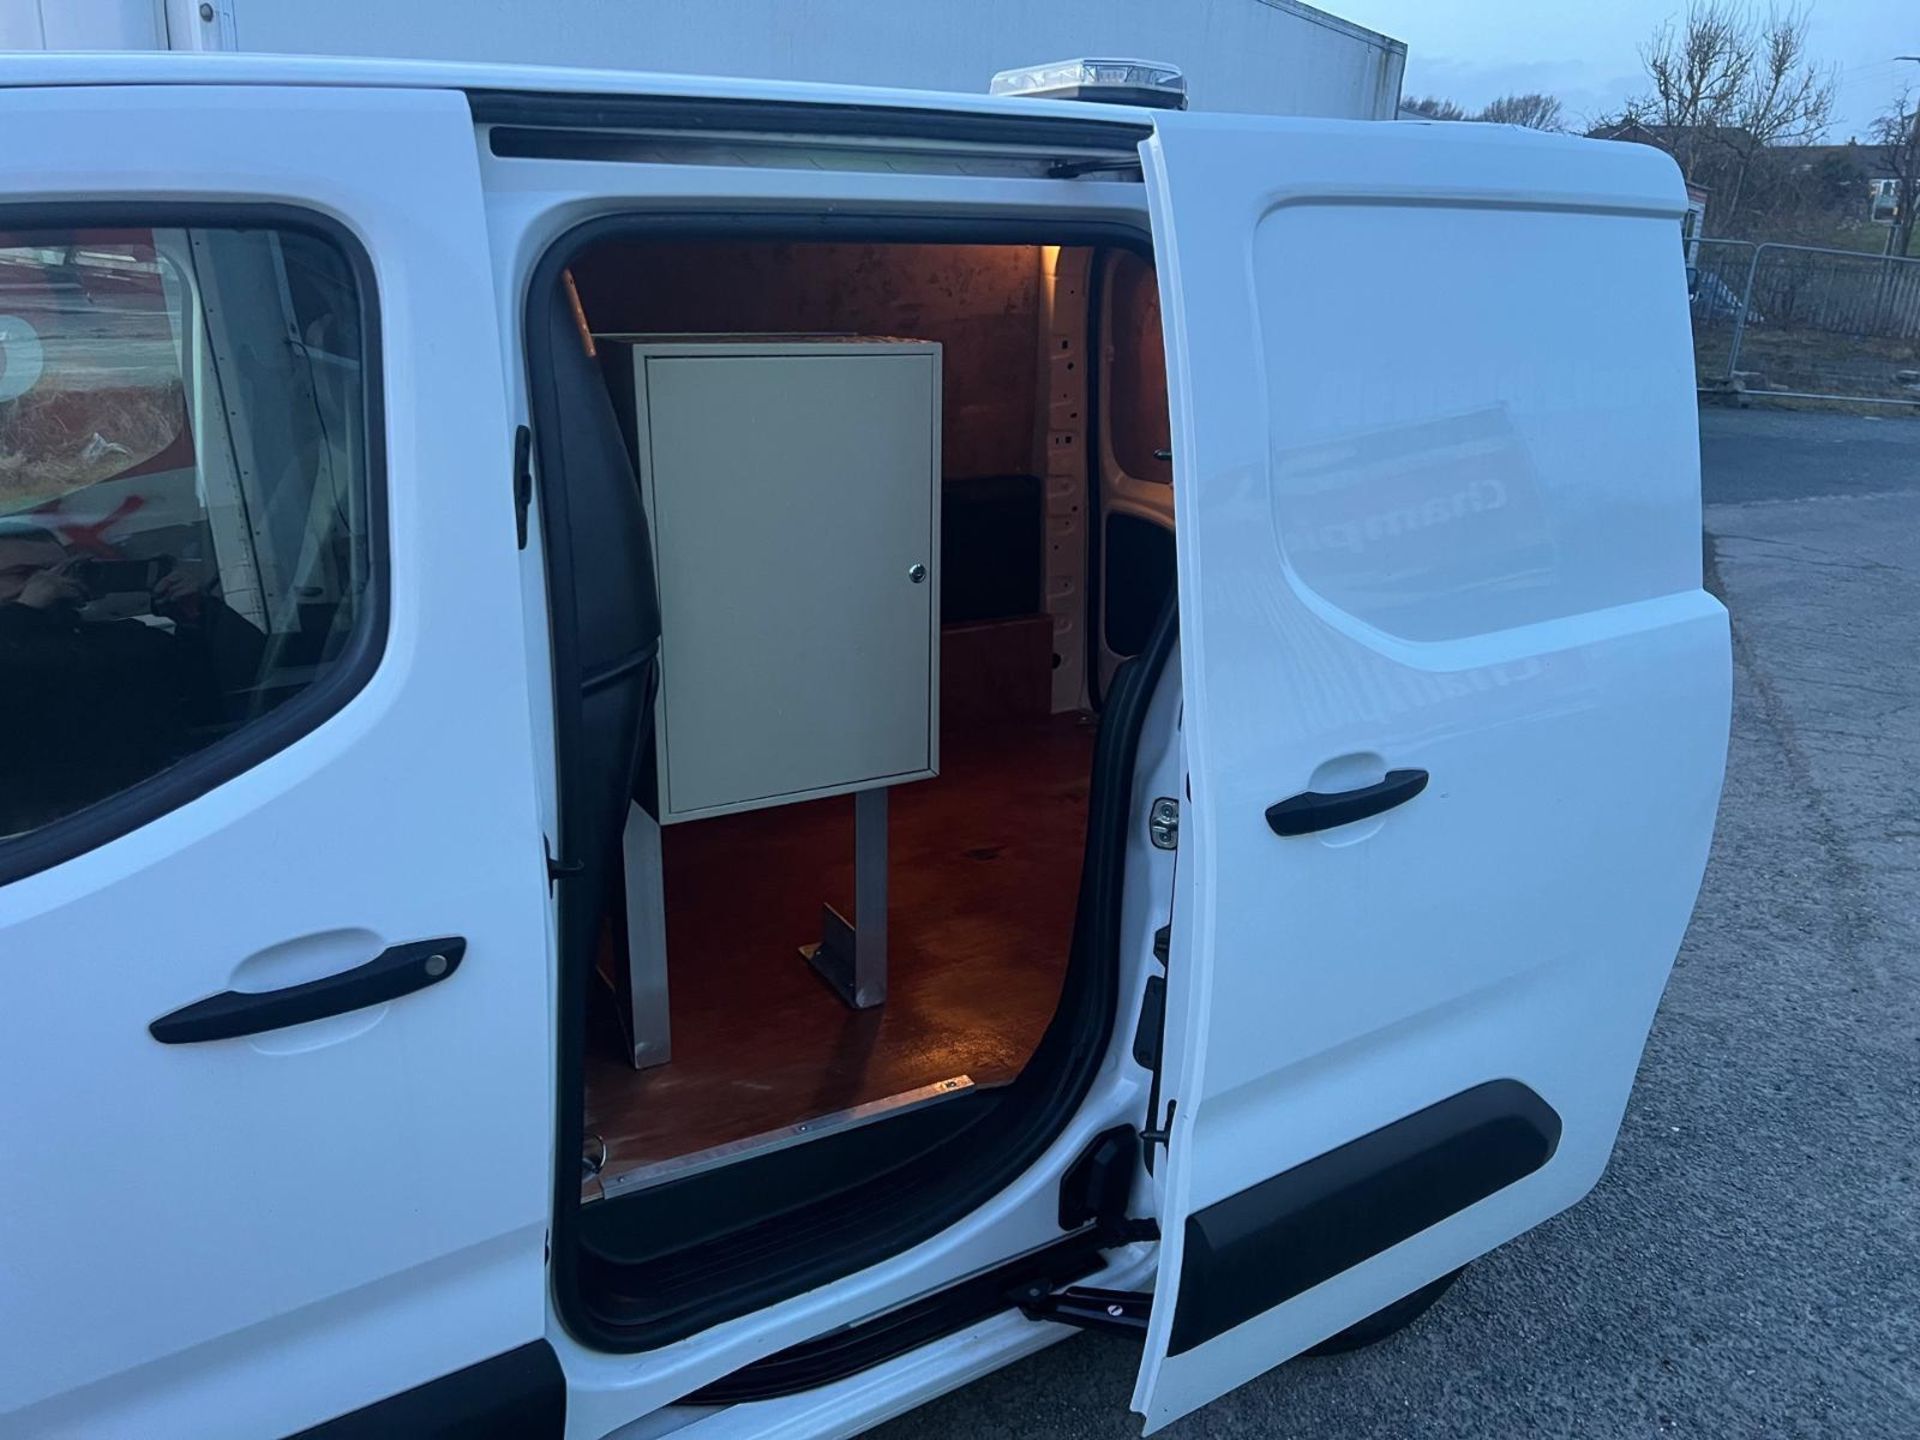 2021 CITROEN BERLINGO ENTERPRISE HDI VAN - COMPACT AND FEATURE-PACKED - Image 5 of 15